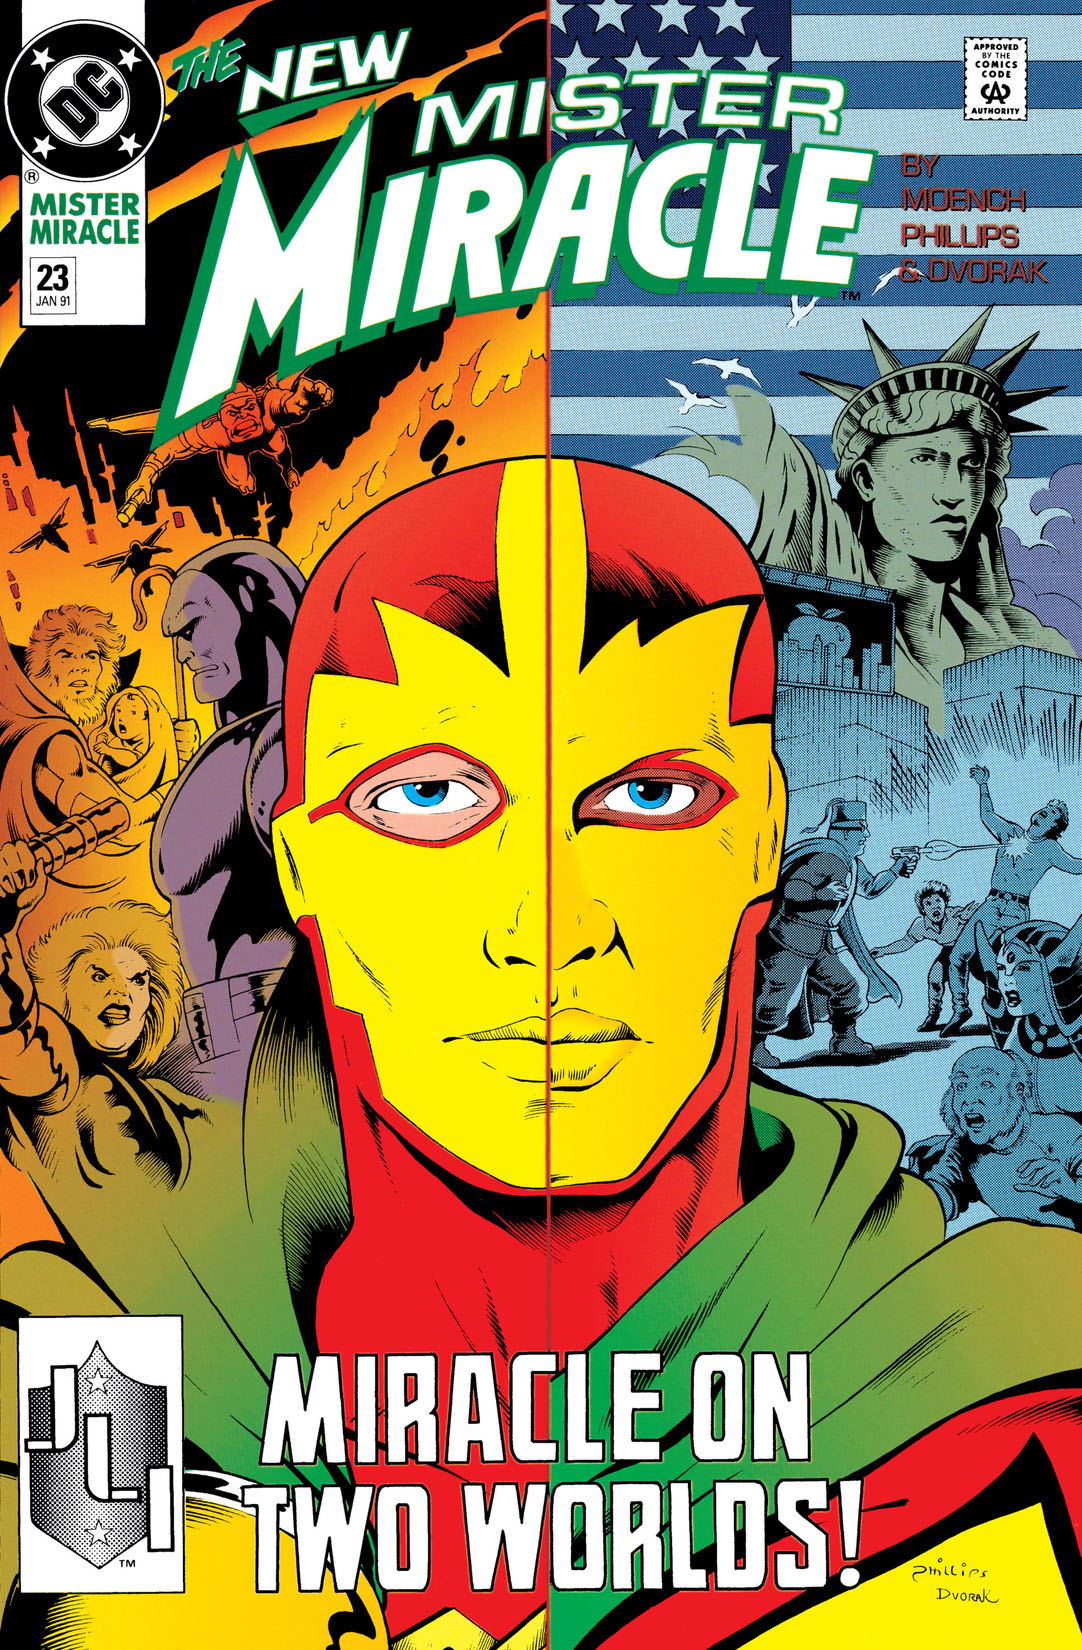 Mister Miracle (1988-) #23 preview images